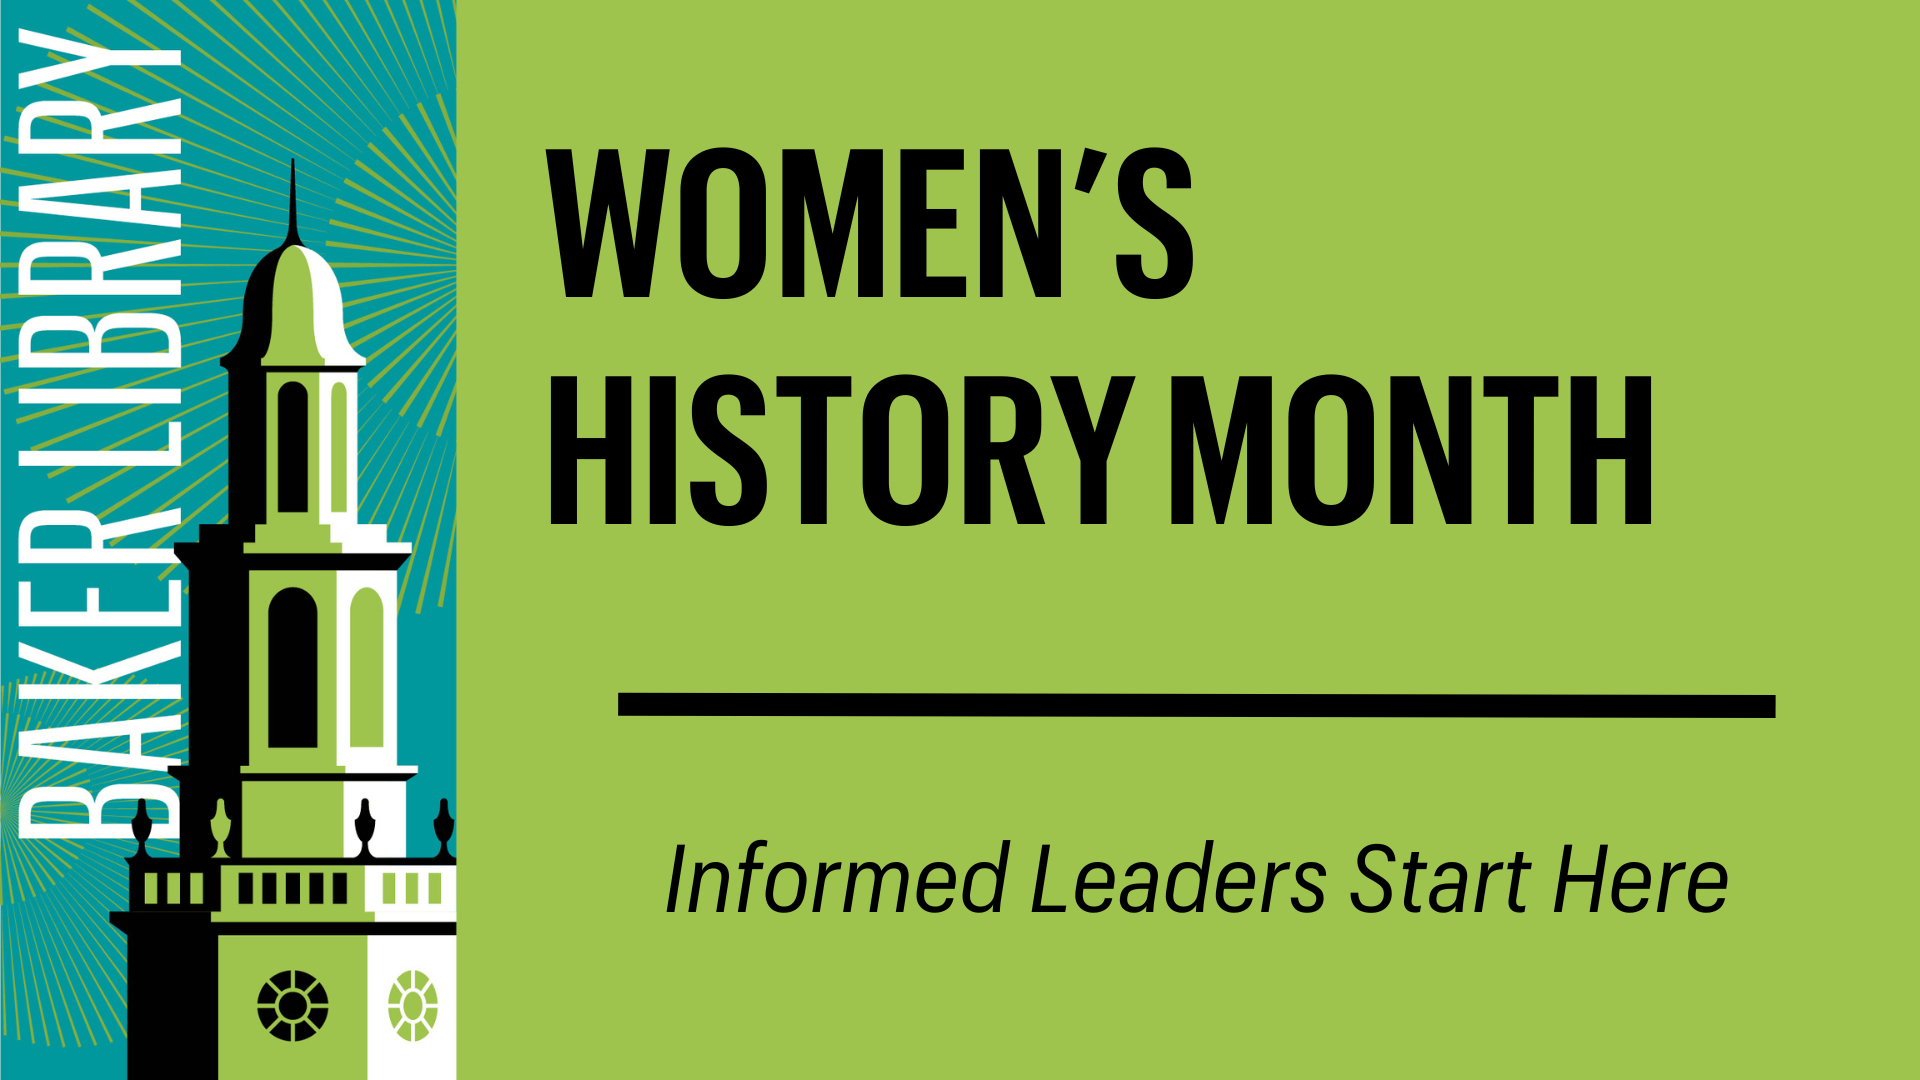 An image that says "Women's History Month" with "Informed Leaders Start Here" as a subsection